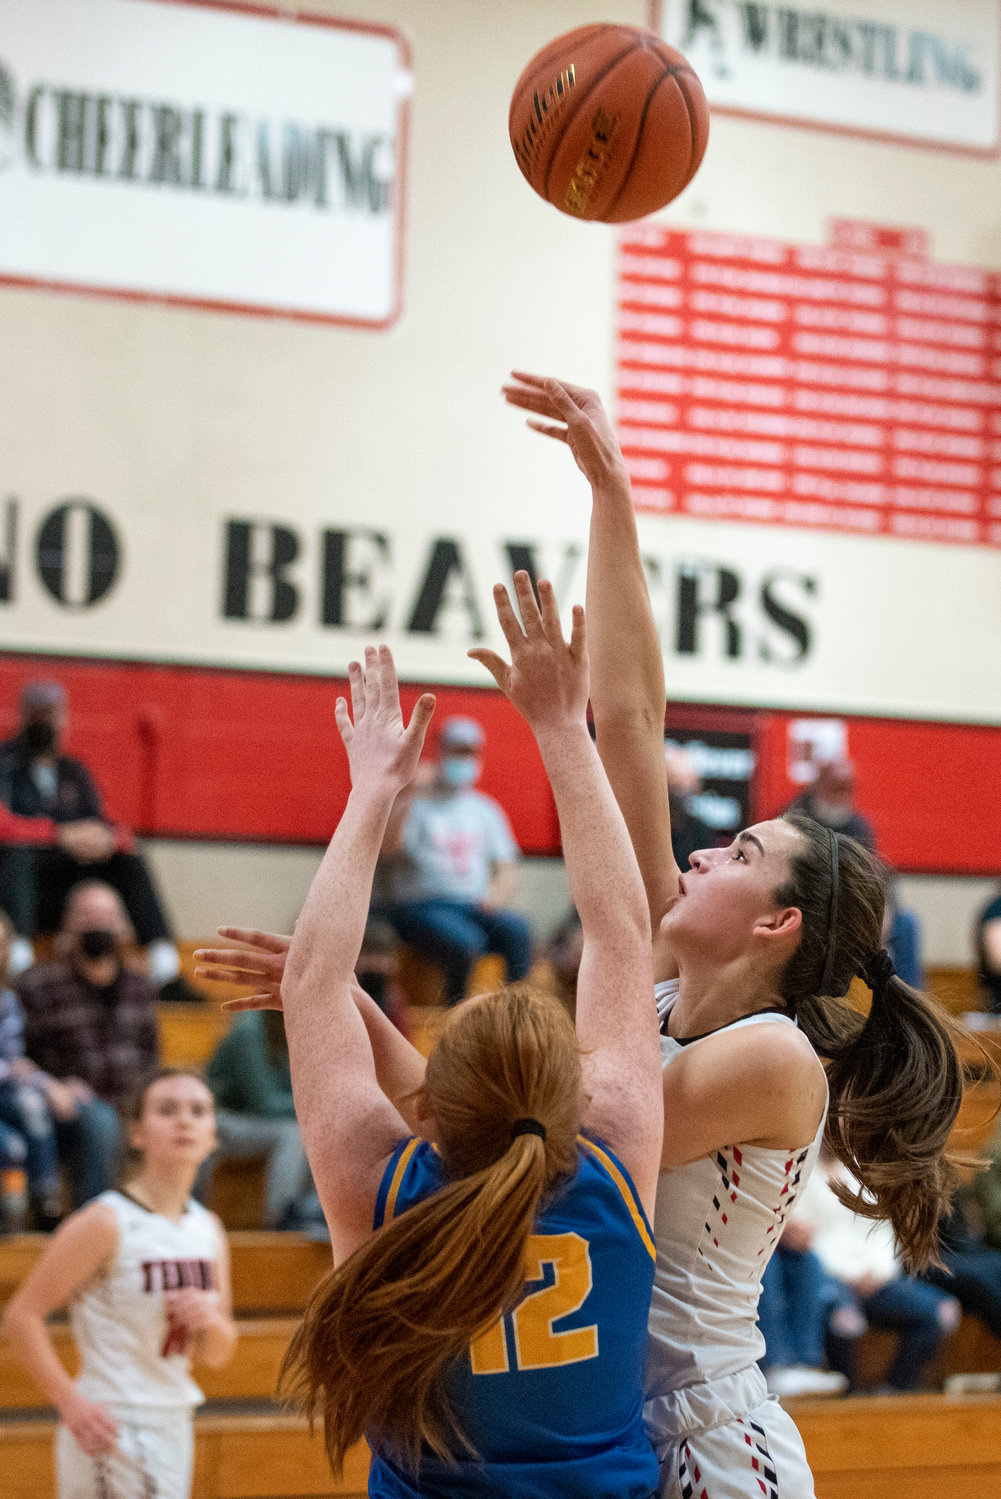 Tenino's Ashley Schow throws up a shot against Adna's Natalie Loose (12) on Dec. 14.